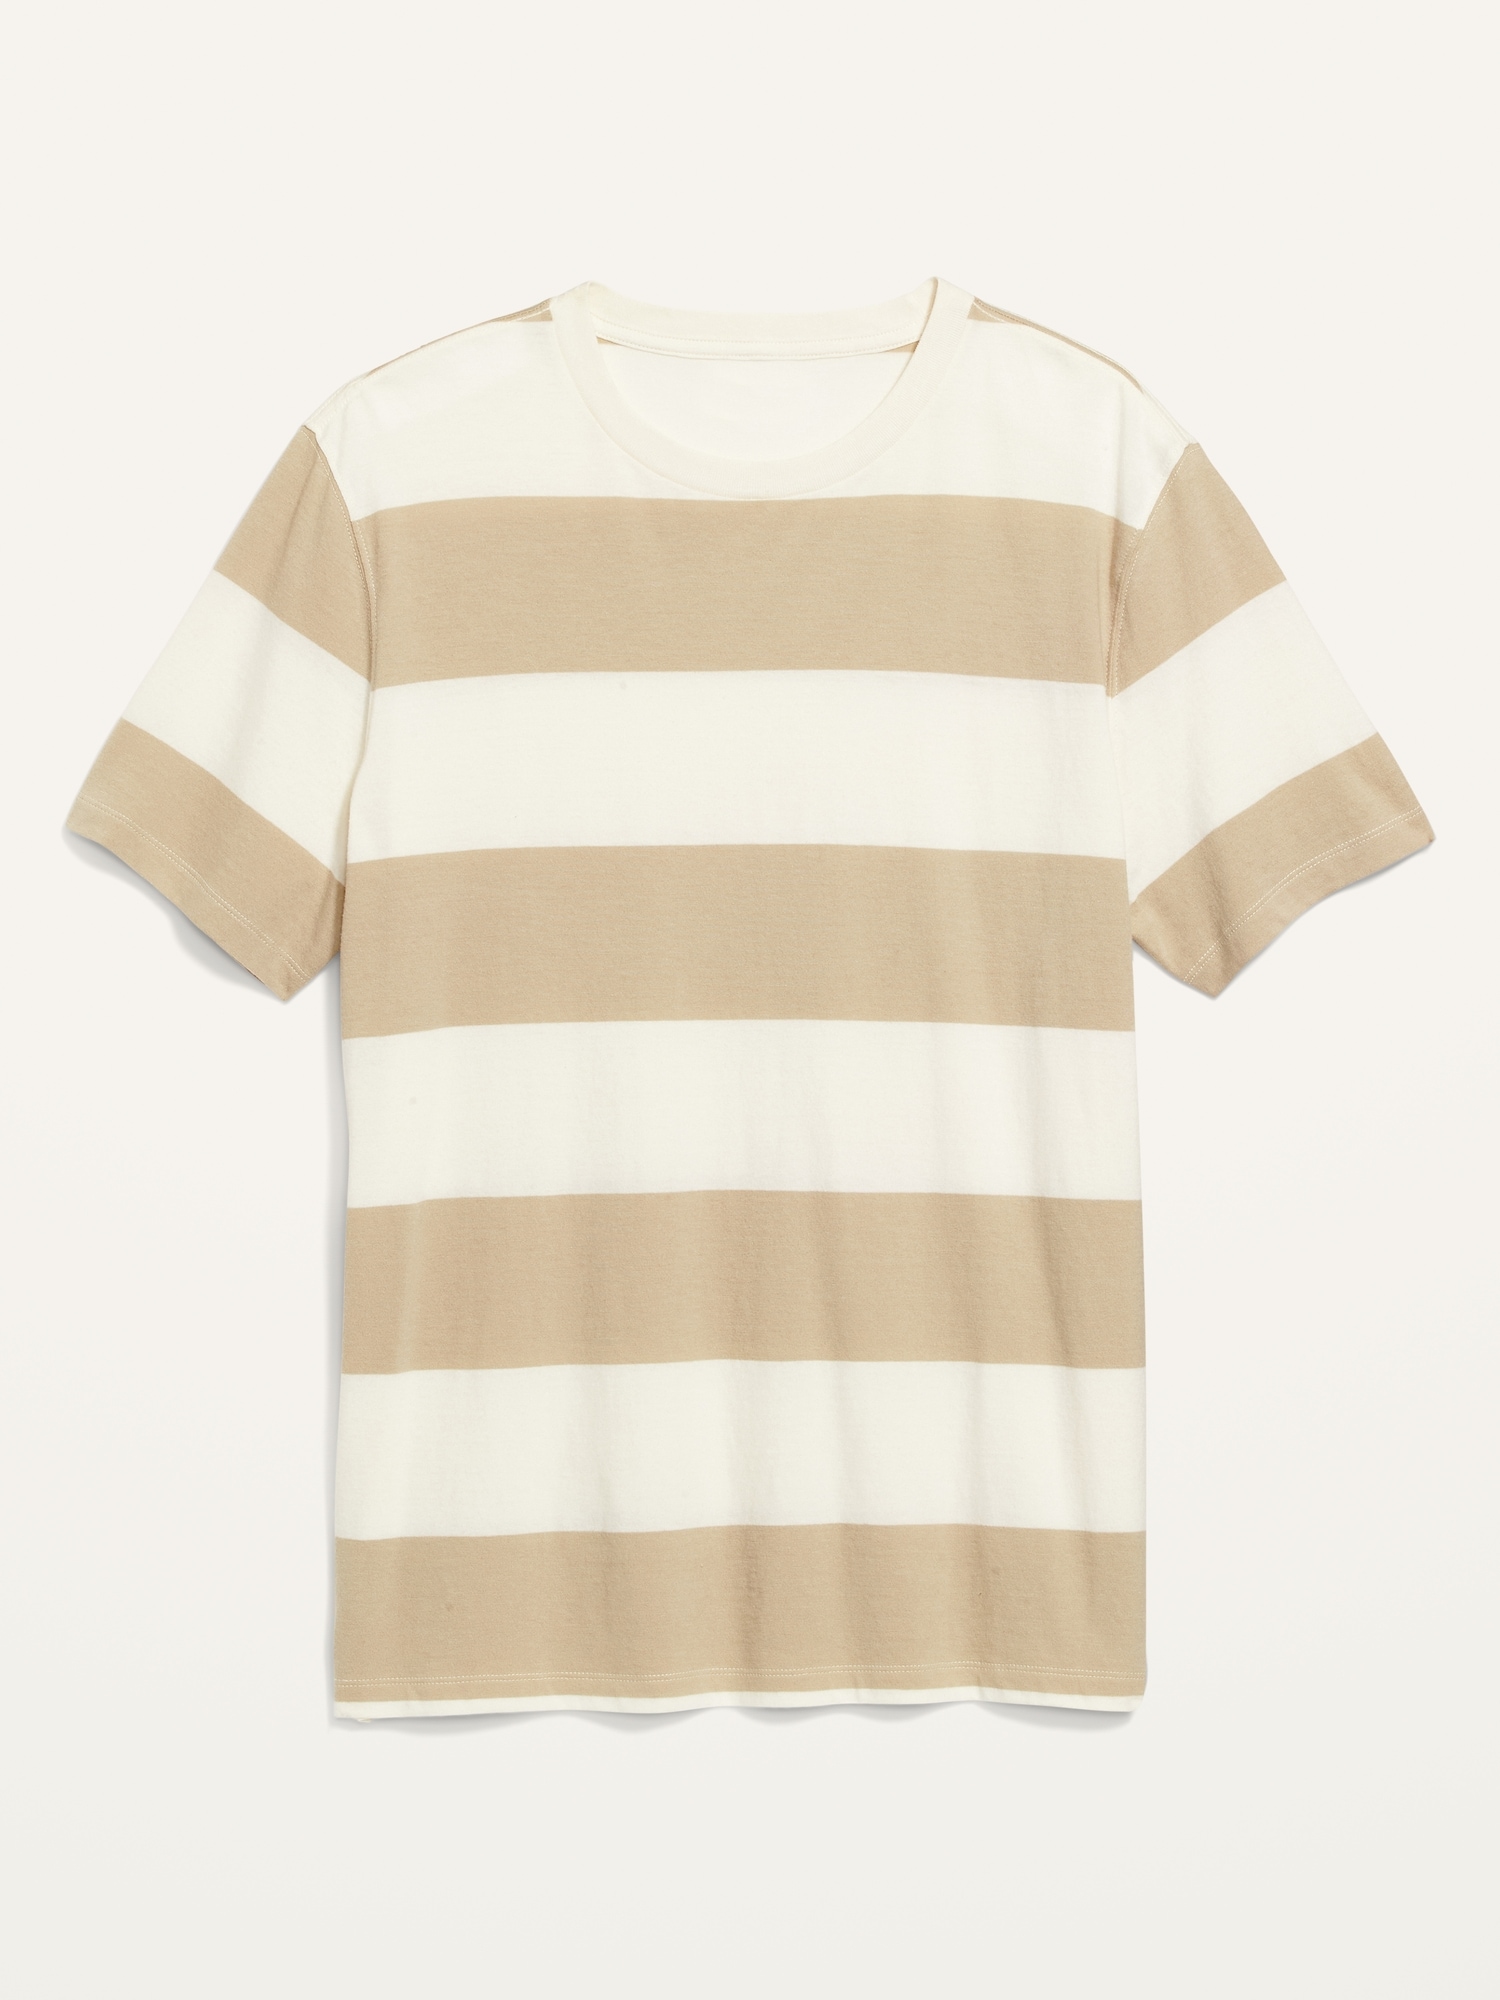 Soft Washed Striped Crew Neck T Shirt For Men Old Navy 8469